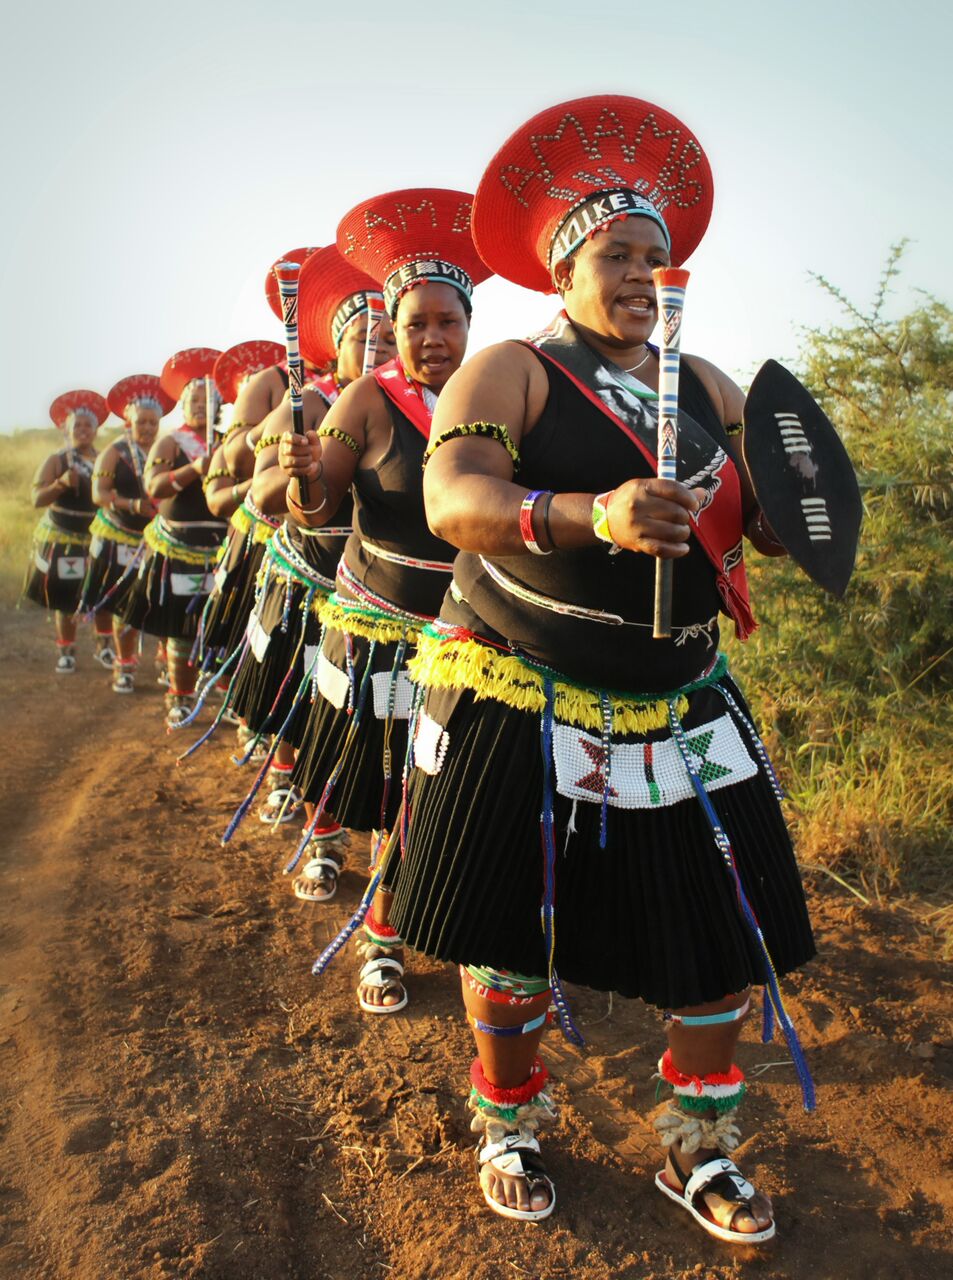 Thanda on Twitter: "The Zulu's hold ceremonies every year that revive